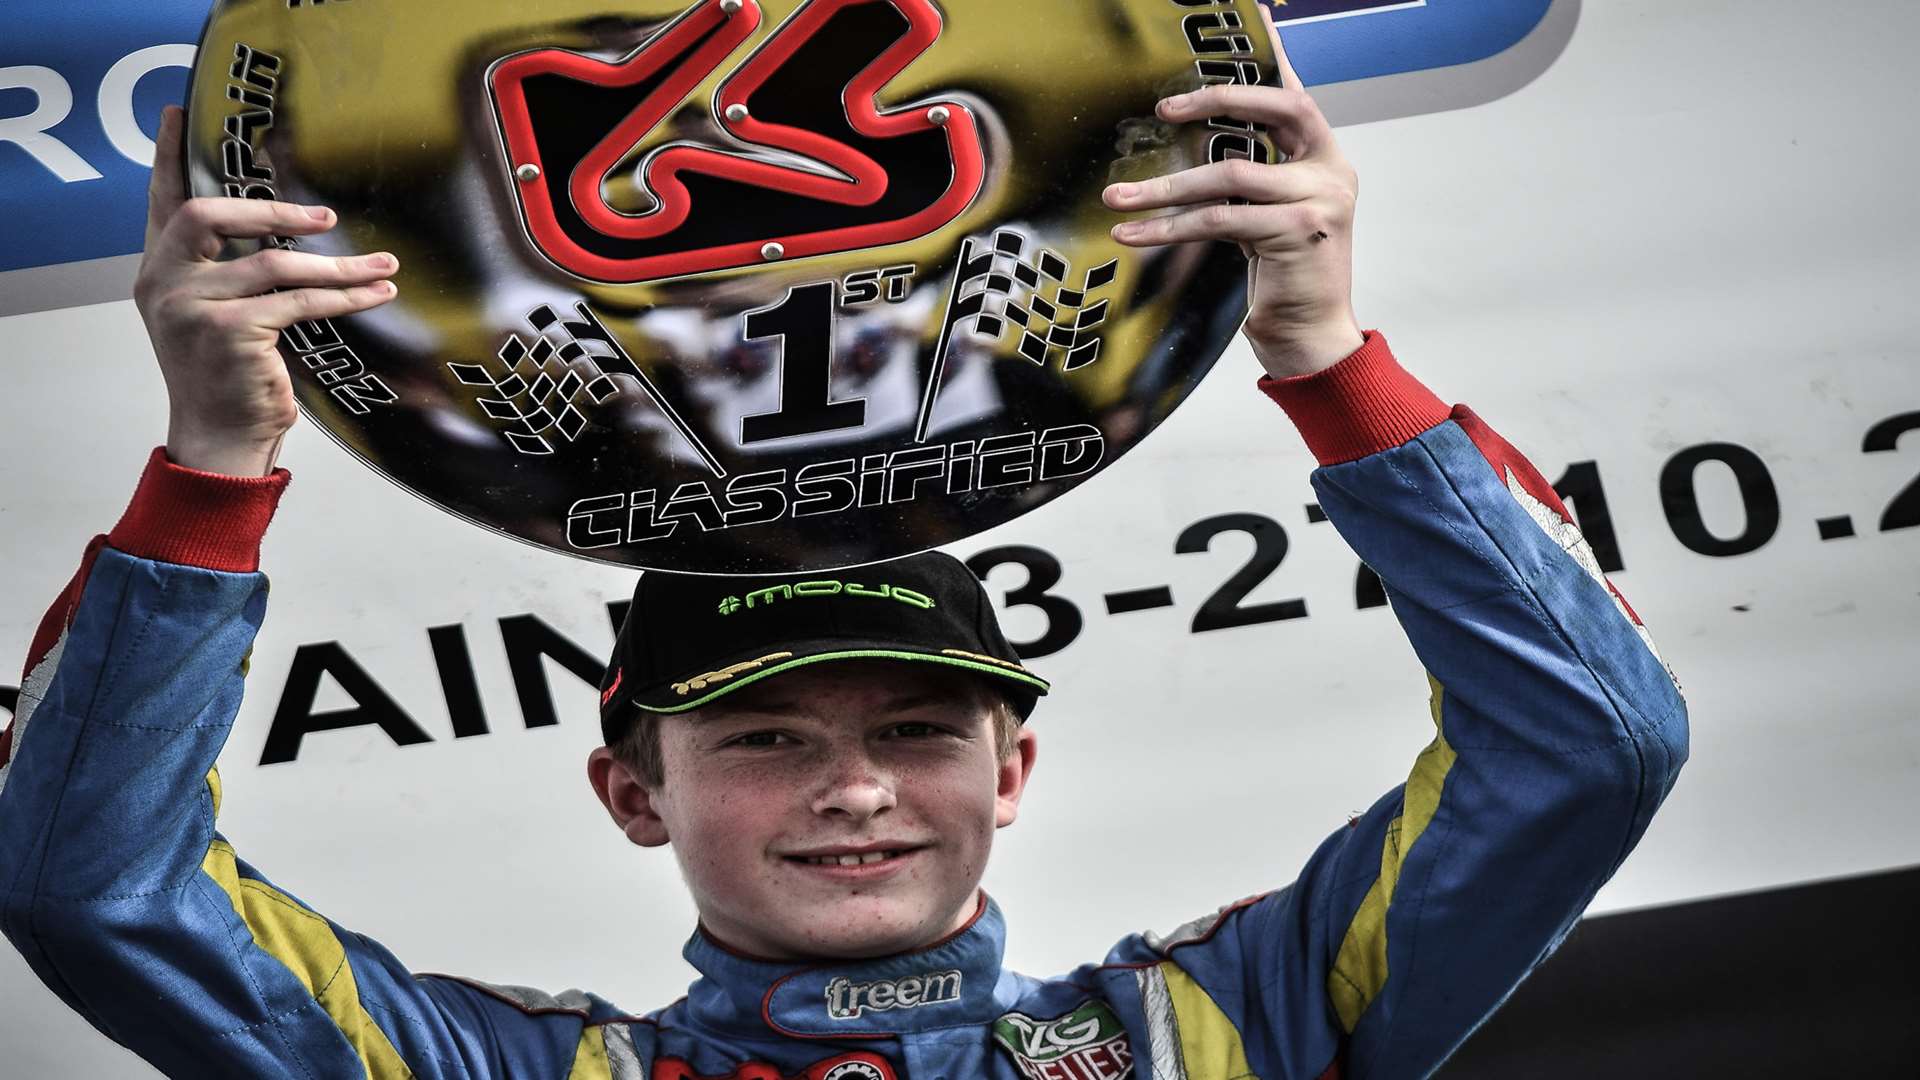 Dave Wooder, 15, motor sport champion from Chatham